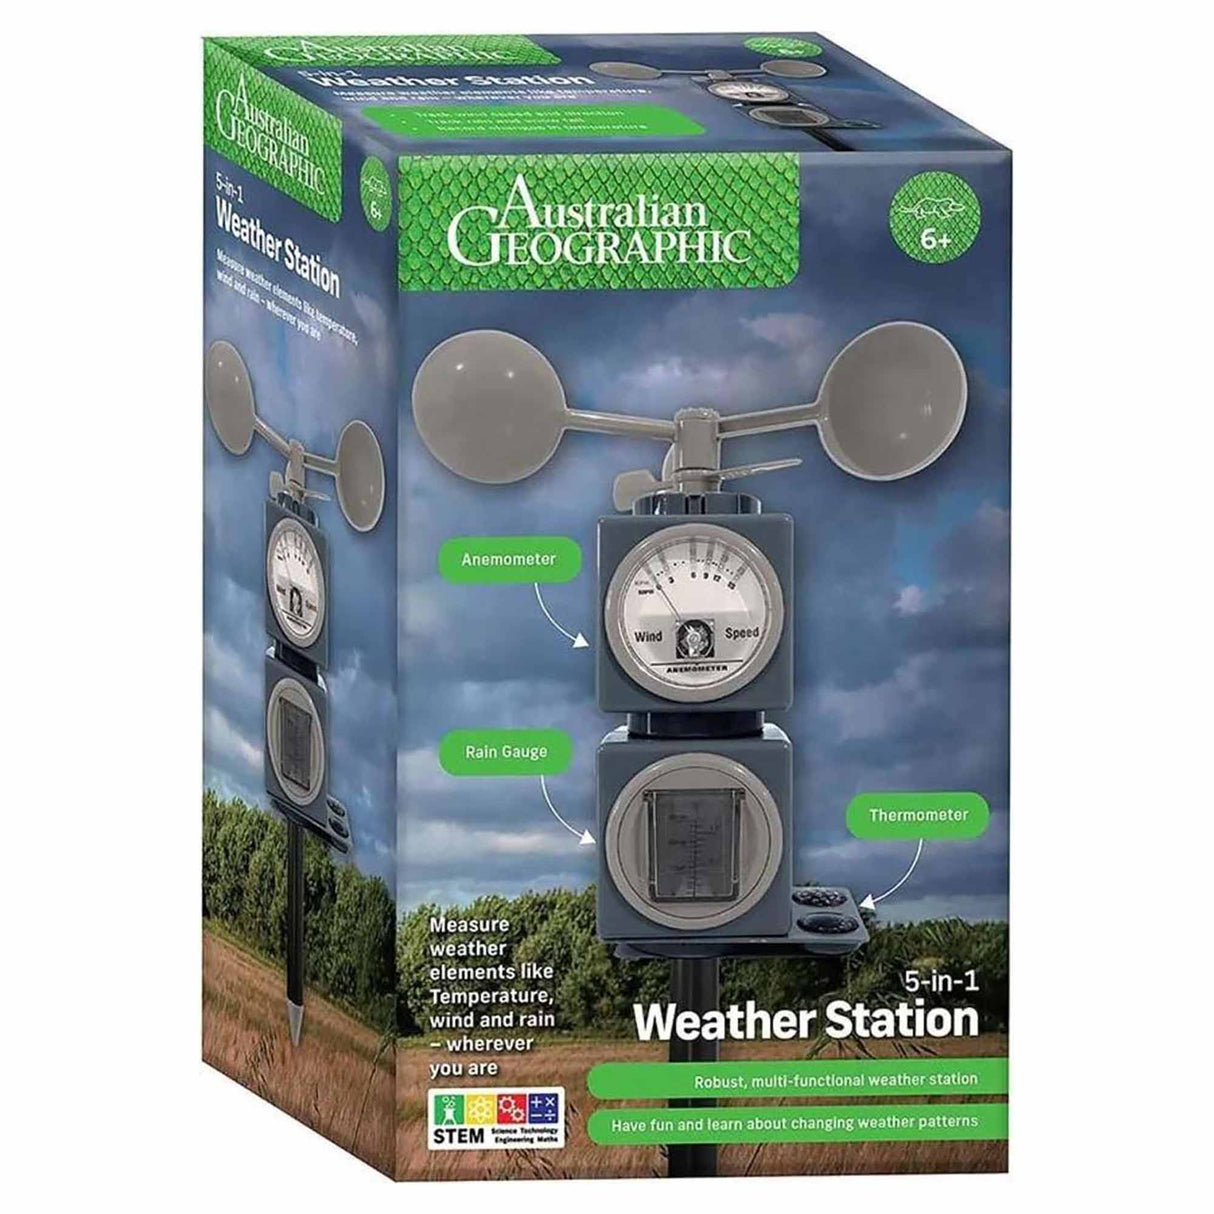 Australian Geographic 5-in-1 Weather Station